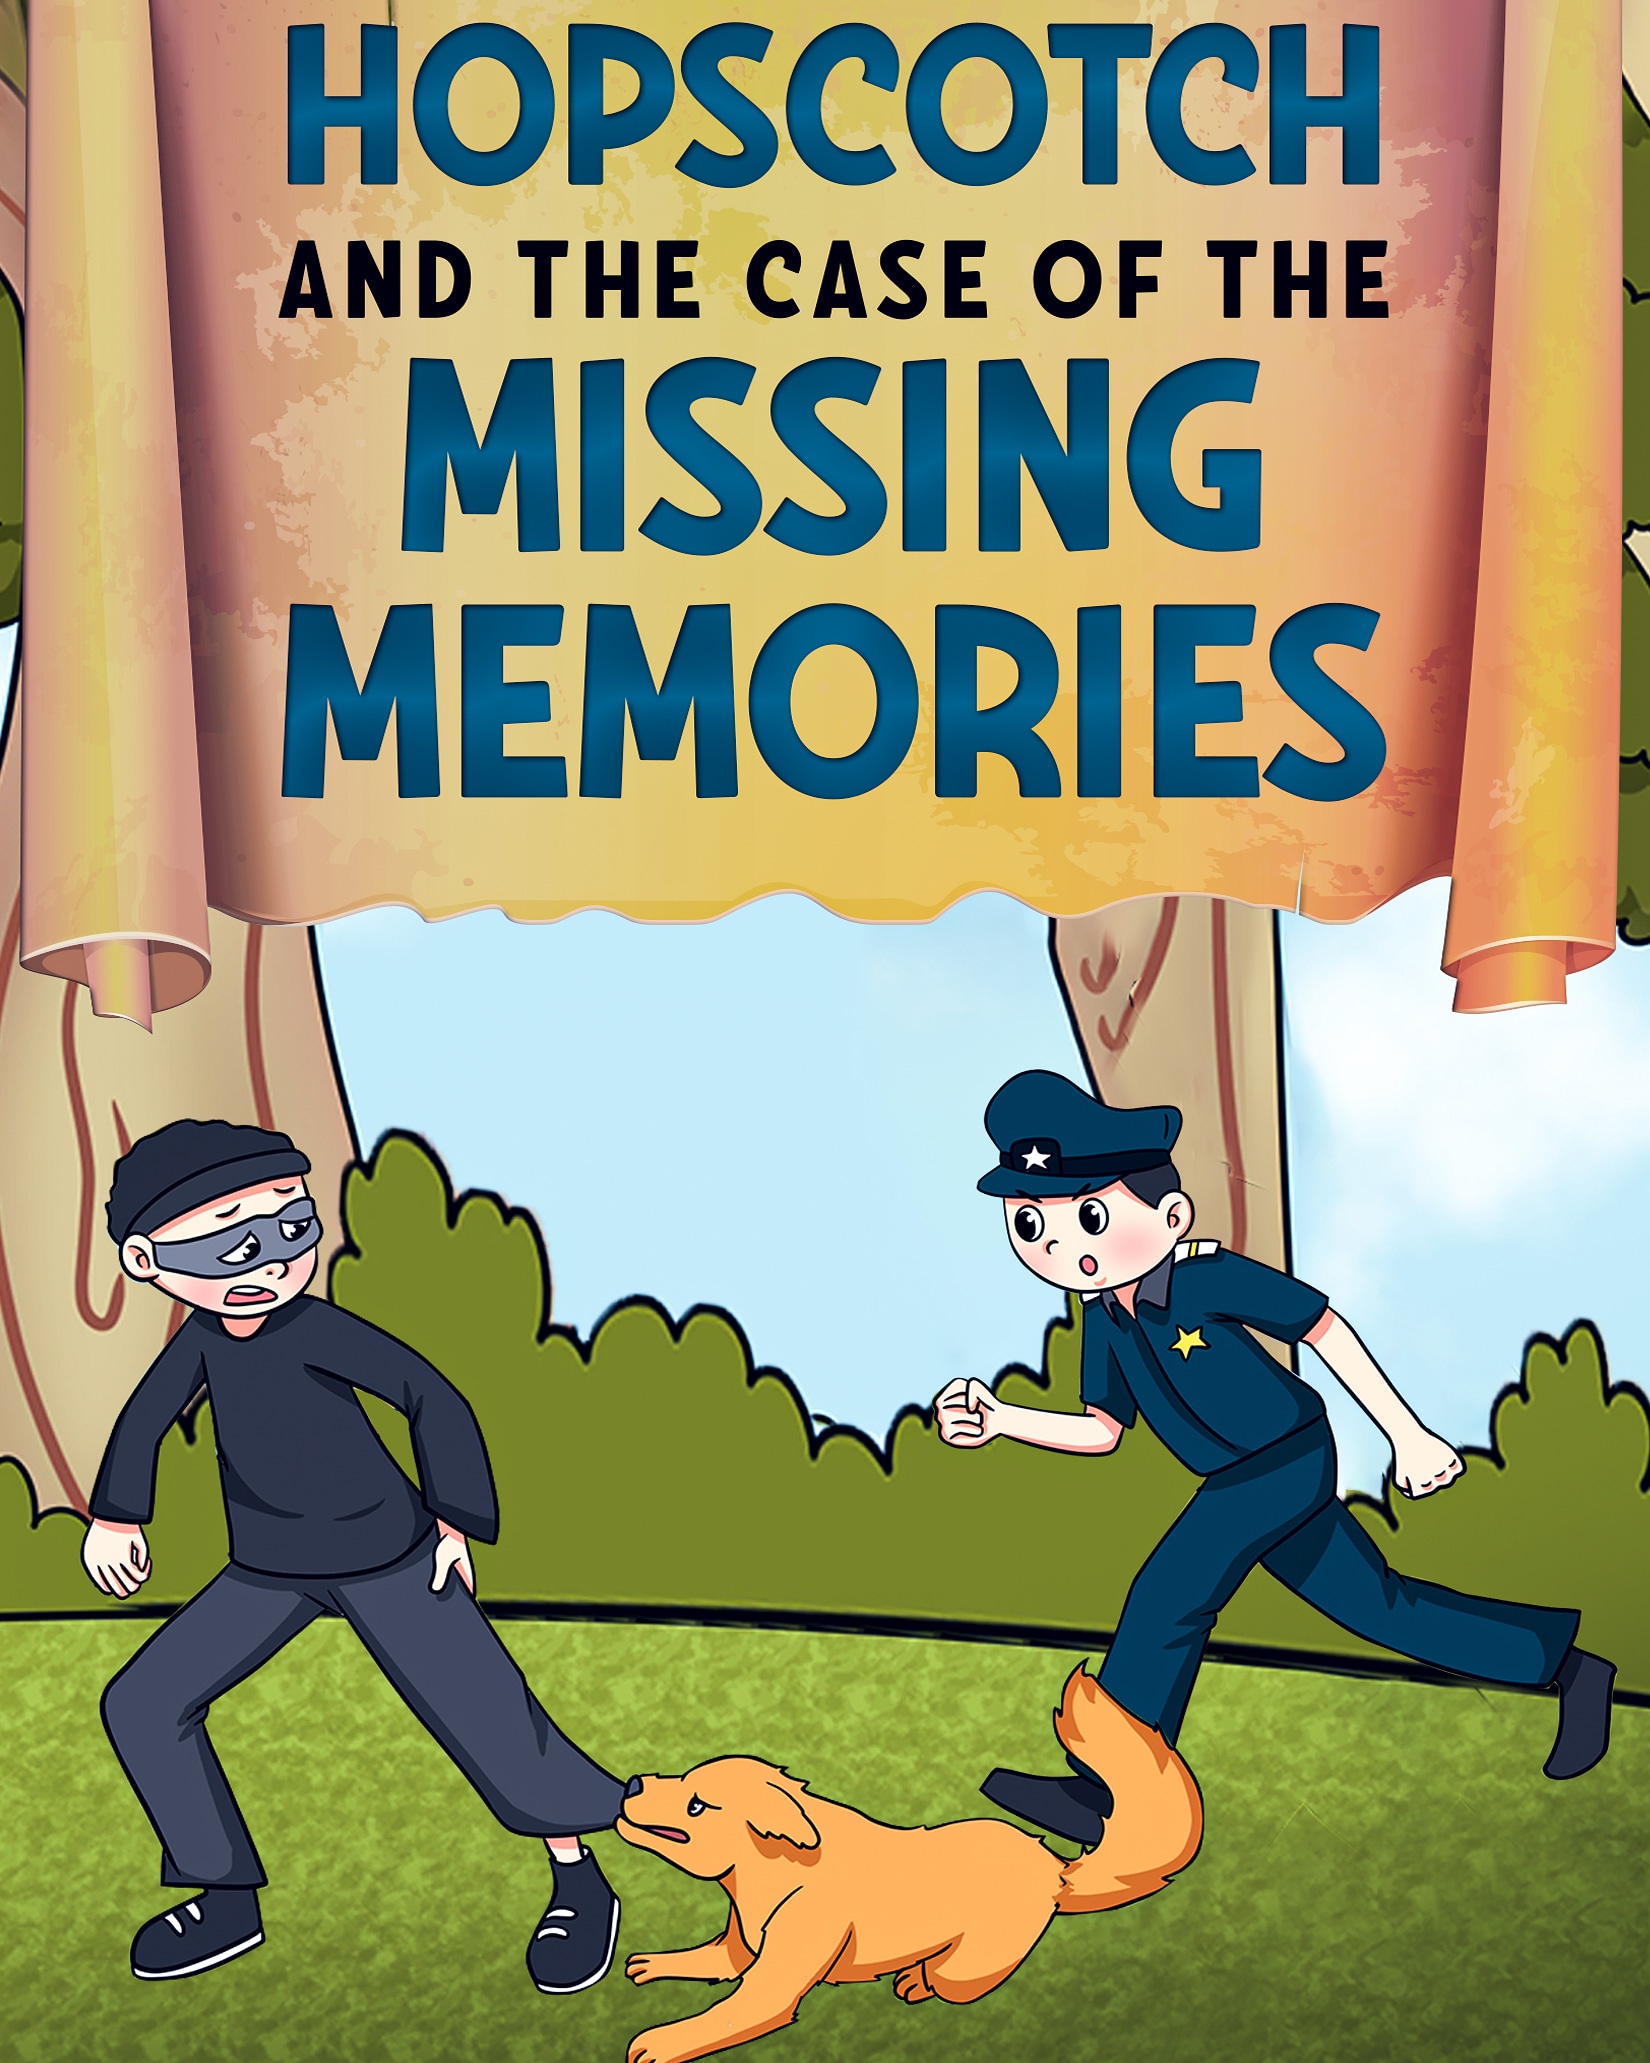 FREE: Hopscotch and th Case of the Missing Memories by Kara Mugleston